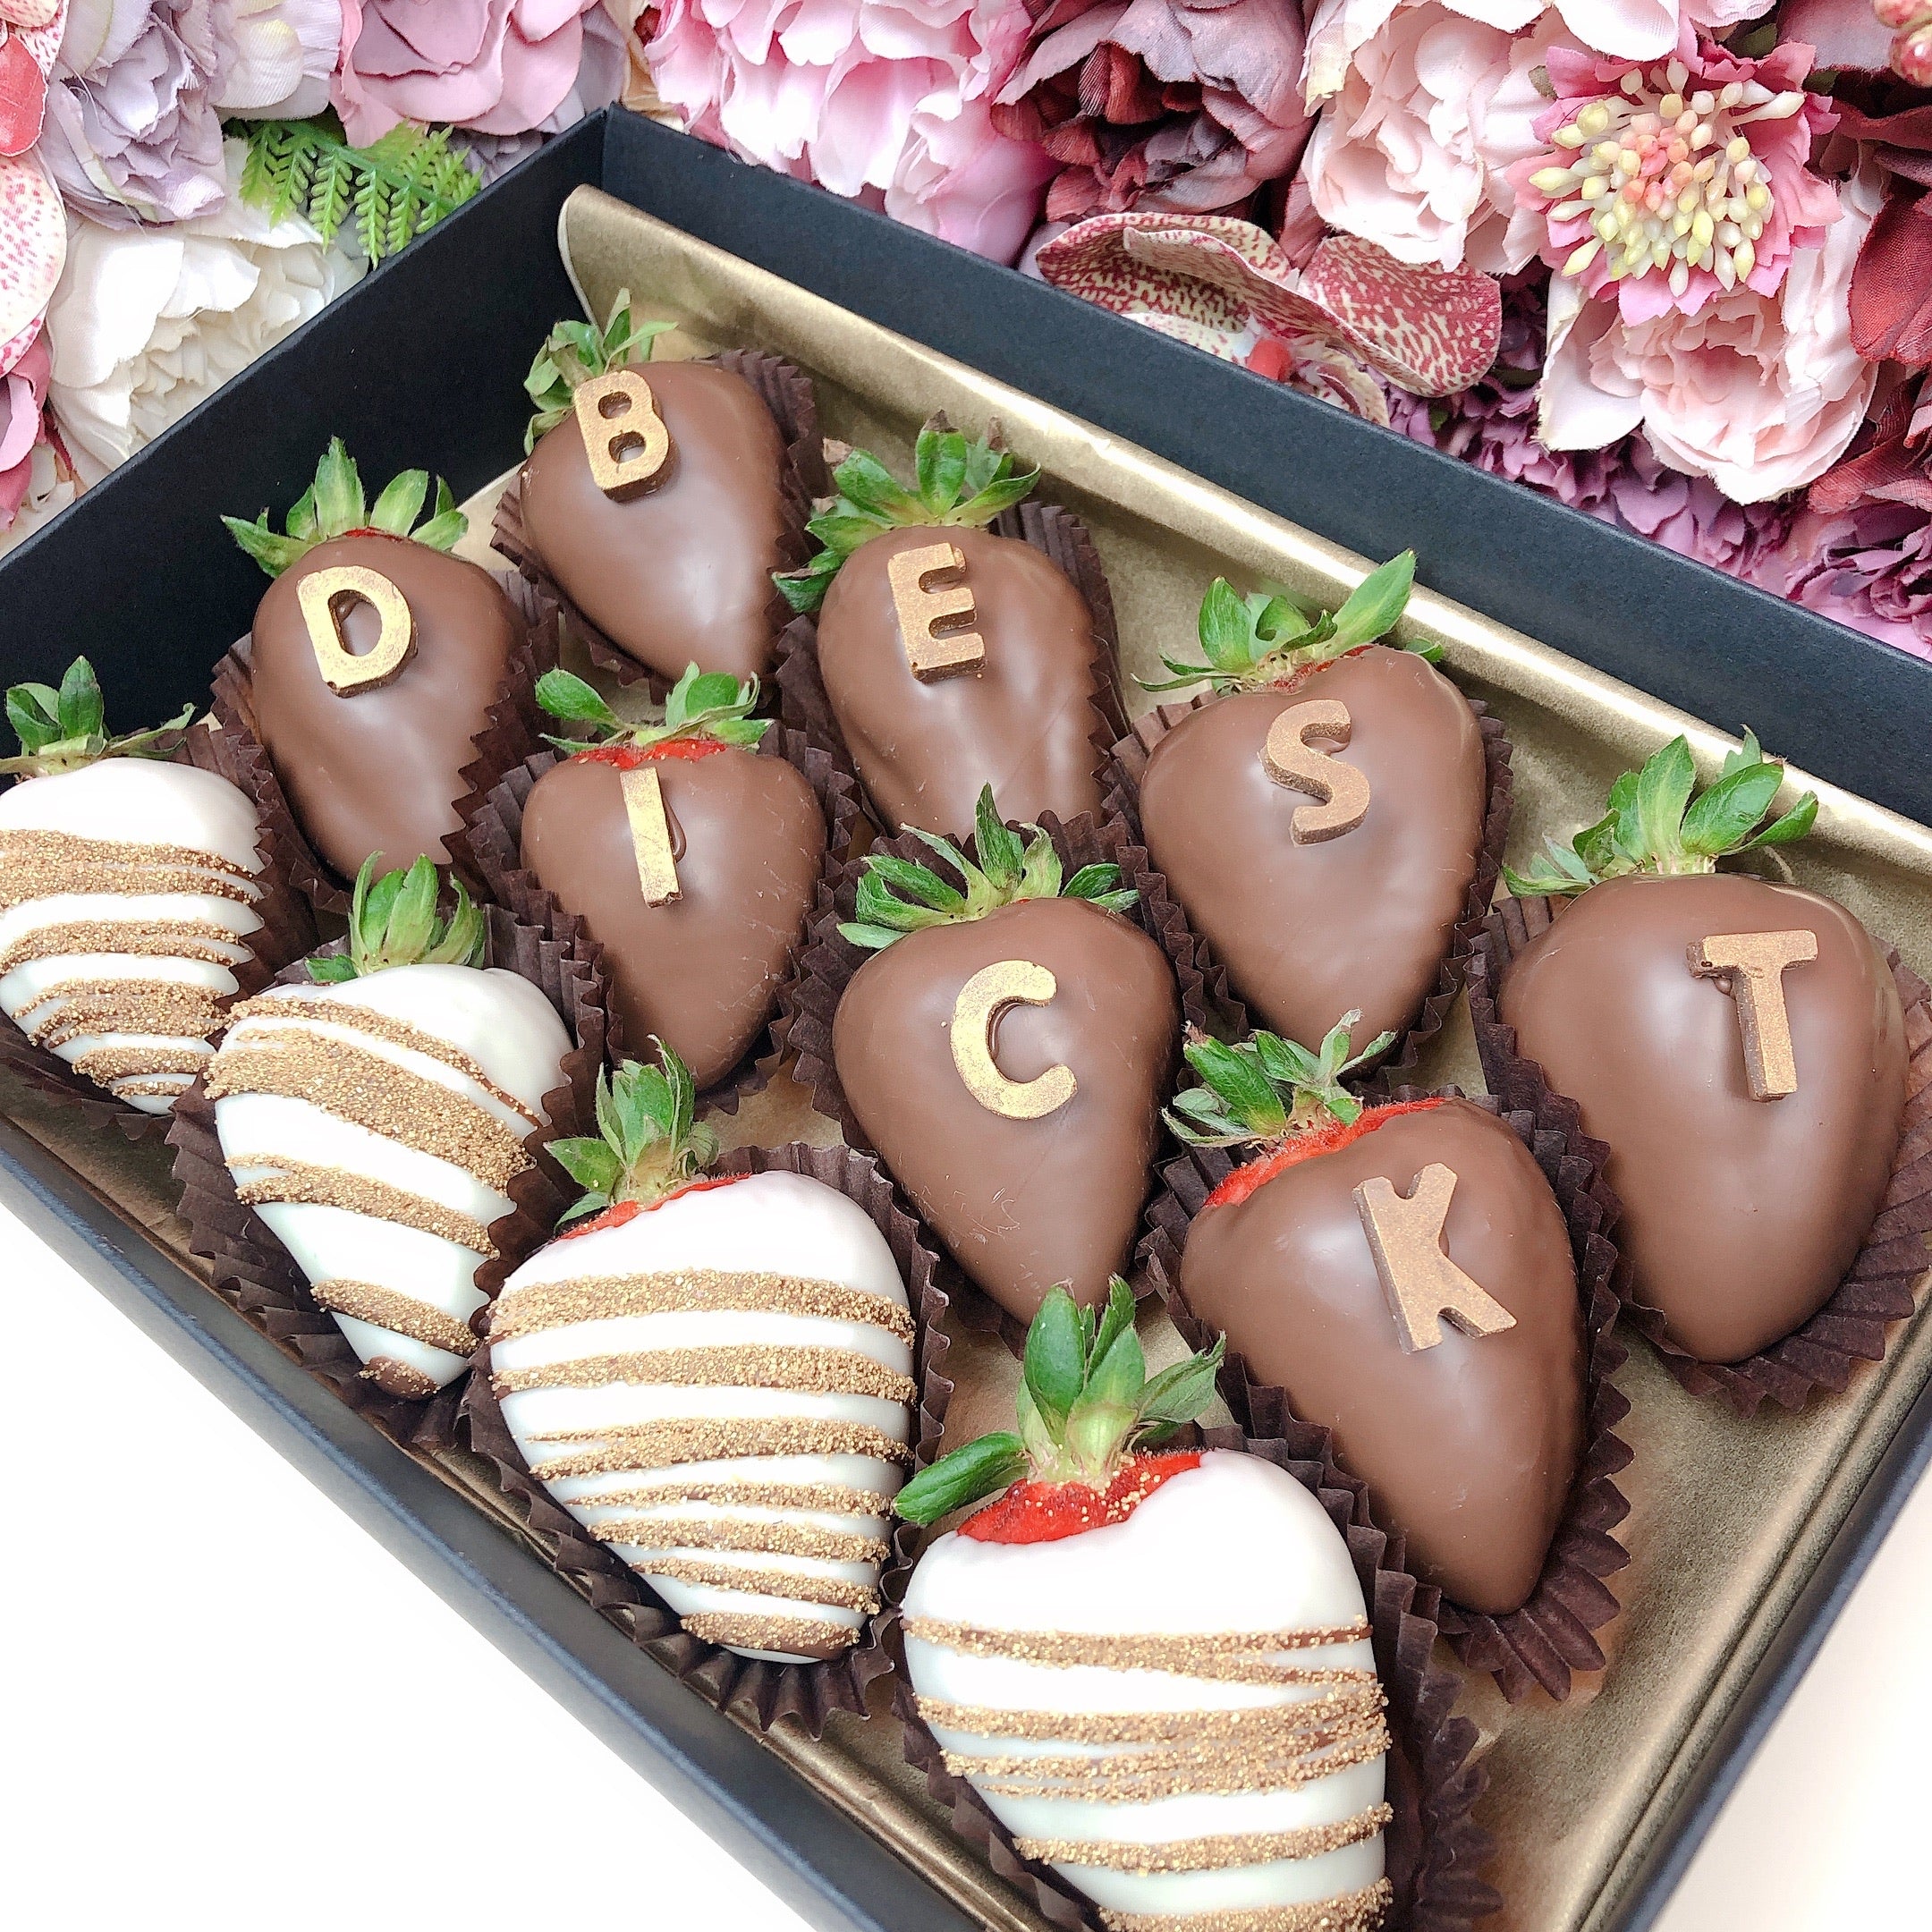 Best dick letters chocolate dessert for him, sexy treat for your man, cheaky sweet present